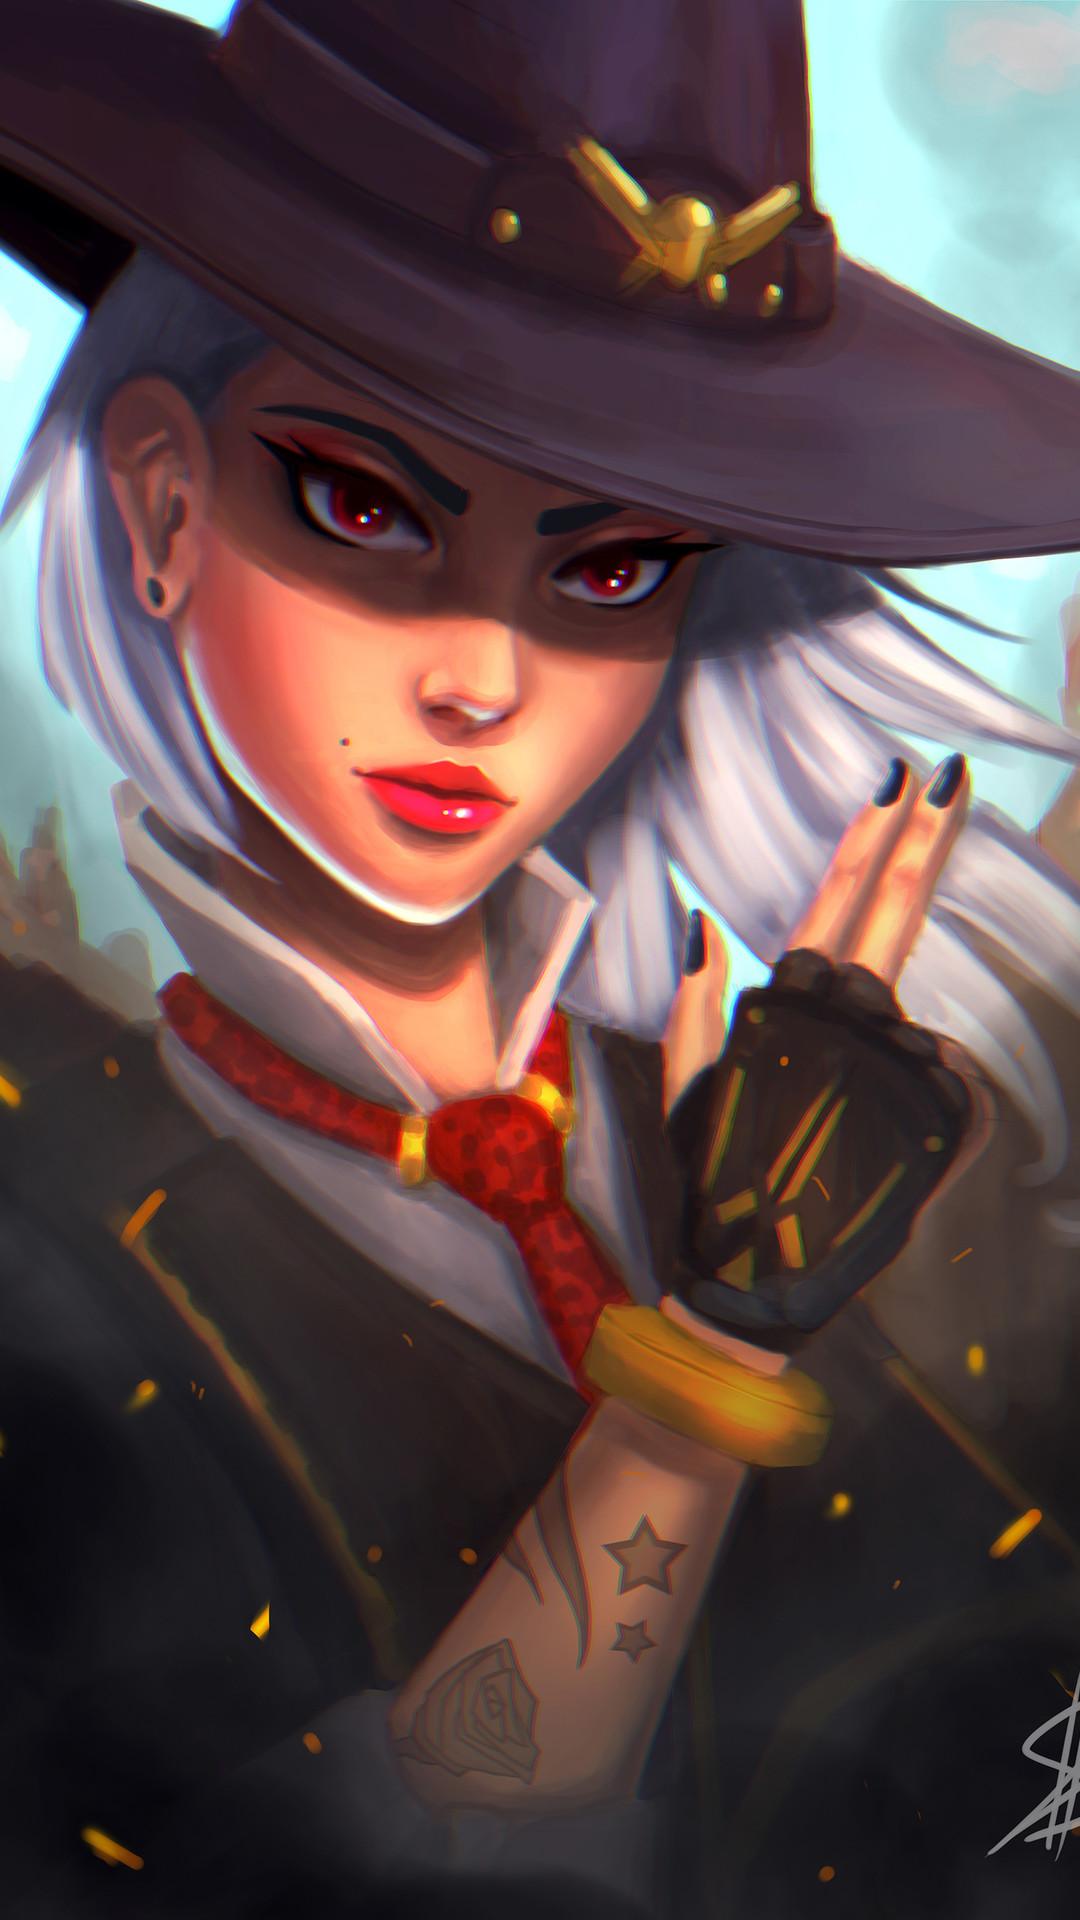 1080x1920 Ashe From Overwatch Iphone 7,6s,6 Plus, Pixel xl ,One Plus